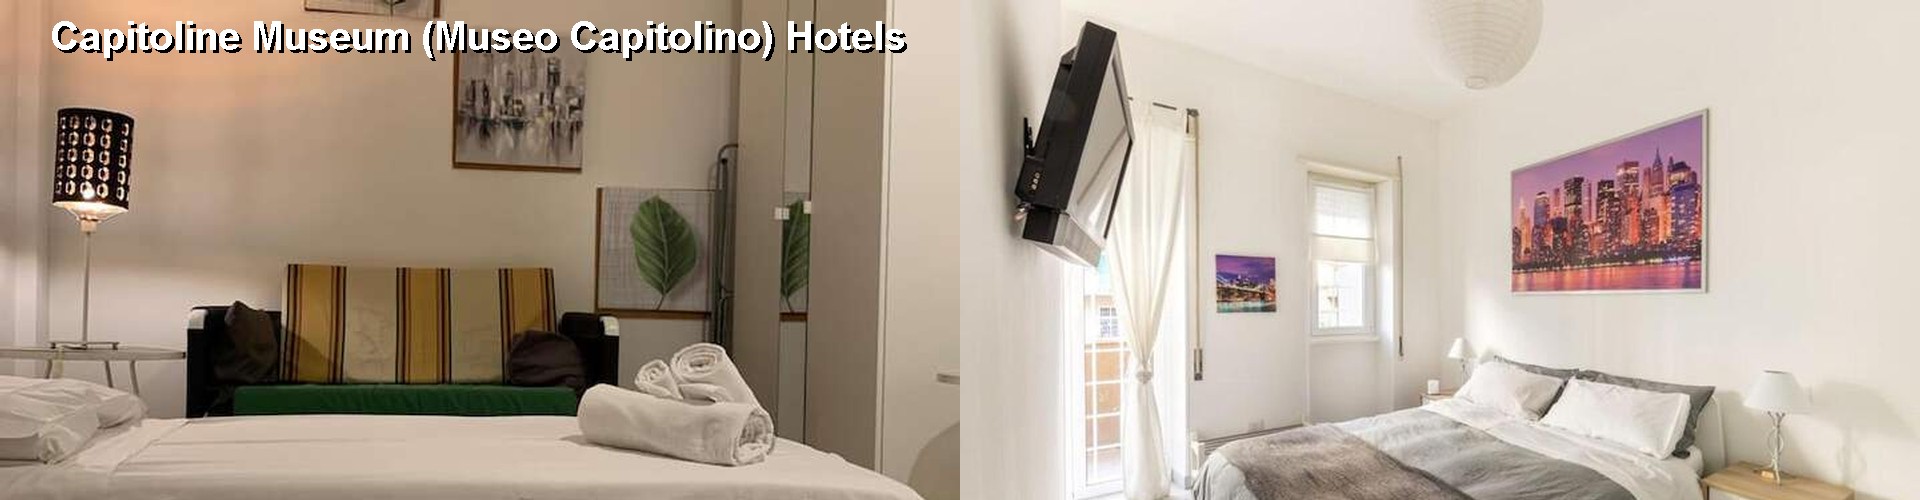 5 Best Hotels near Capitoline Museum (Museo Capitolino)